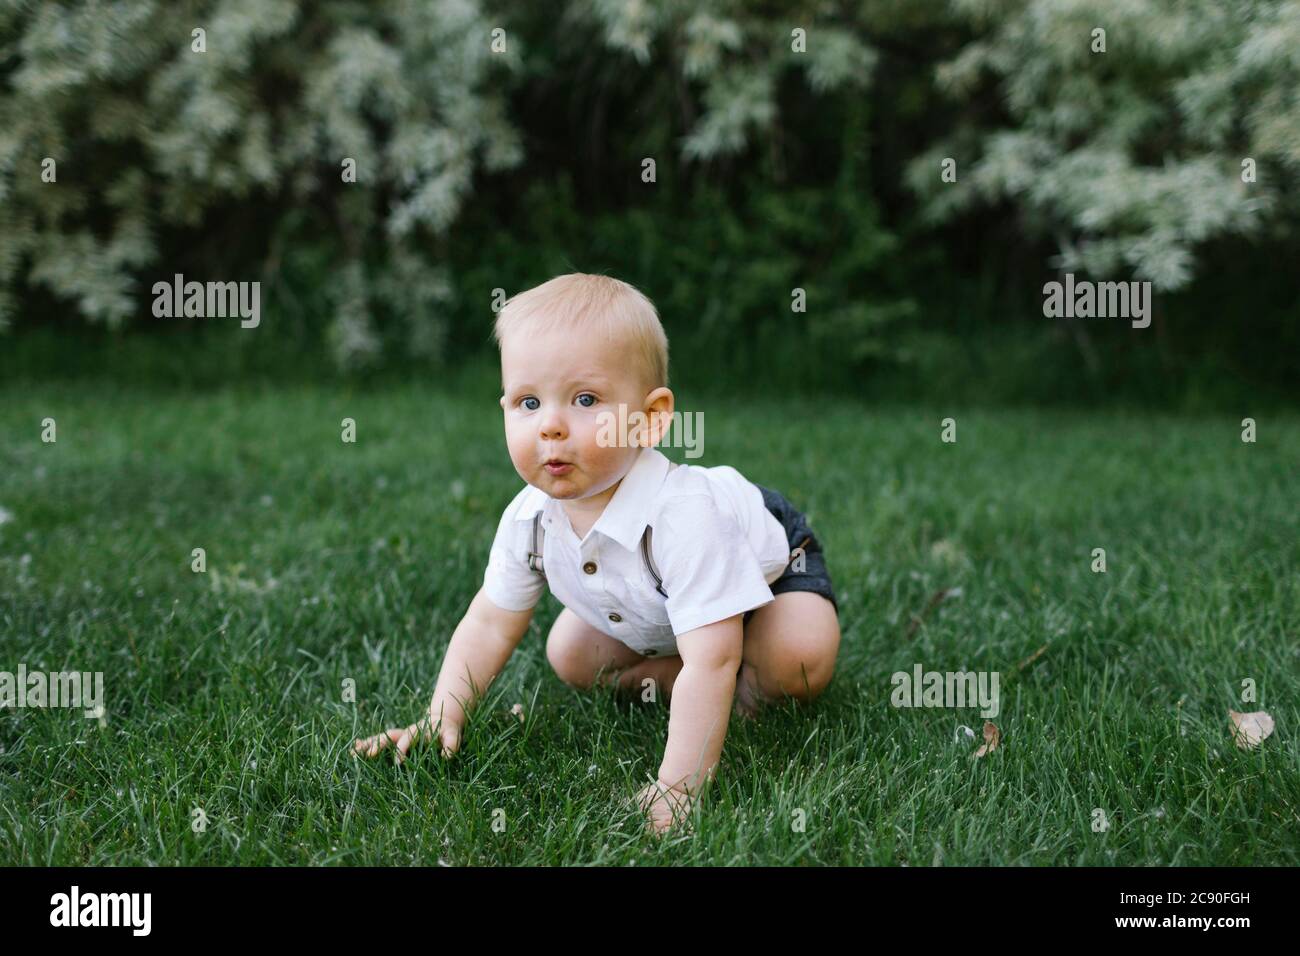 Baby Boy crawling in grass Banque D'Images